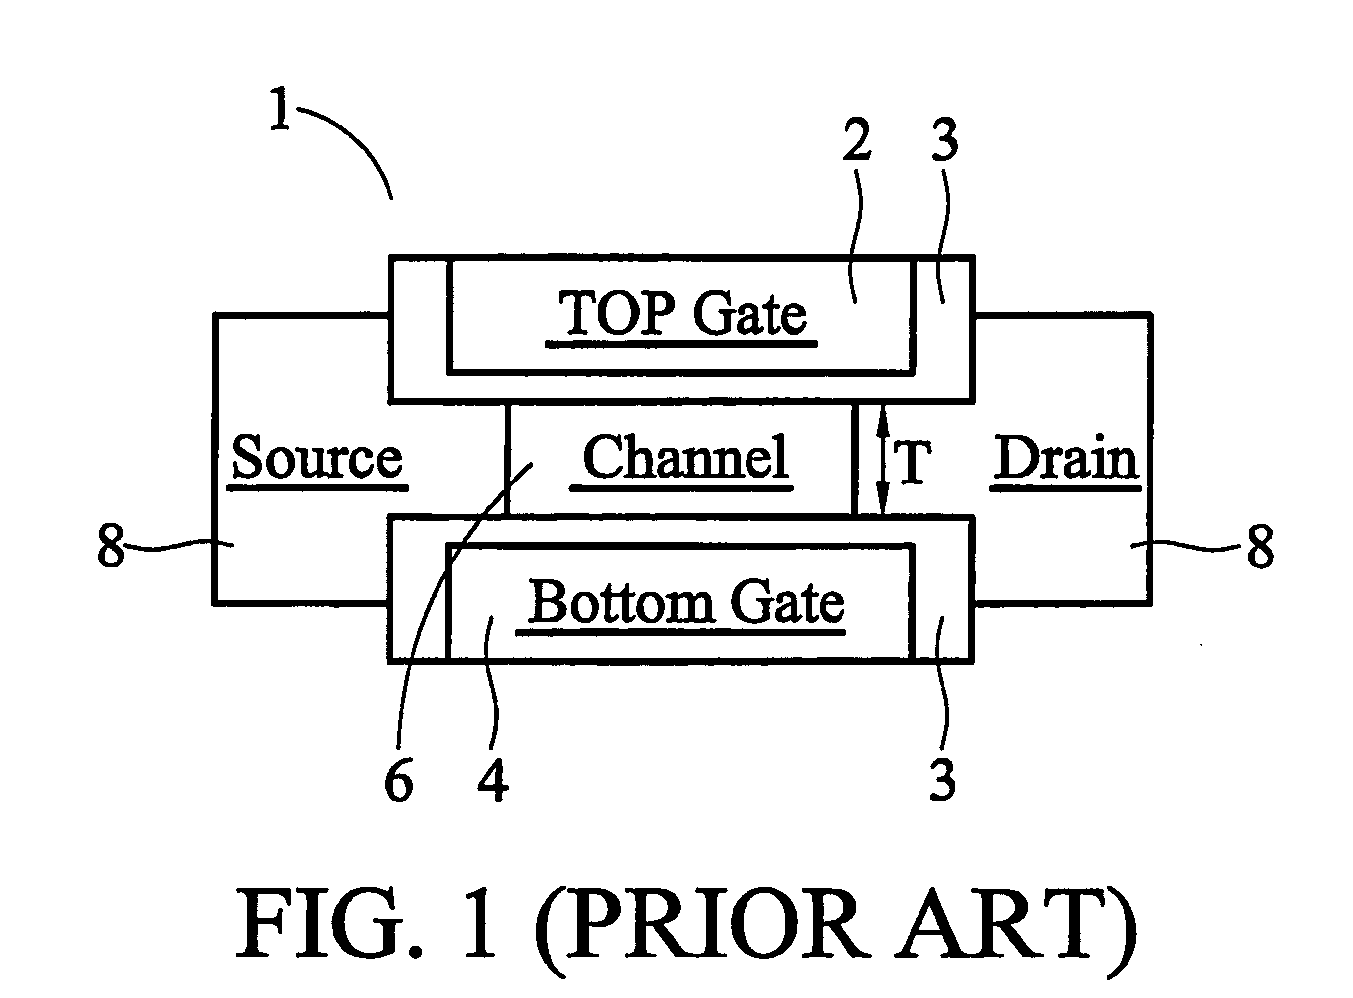 Self-aligned double gate device and method for forming same